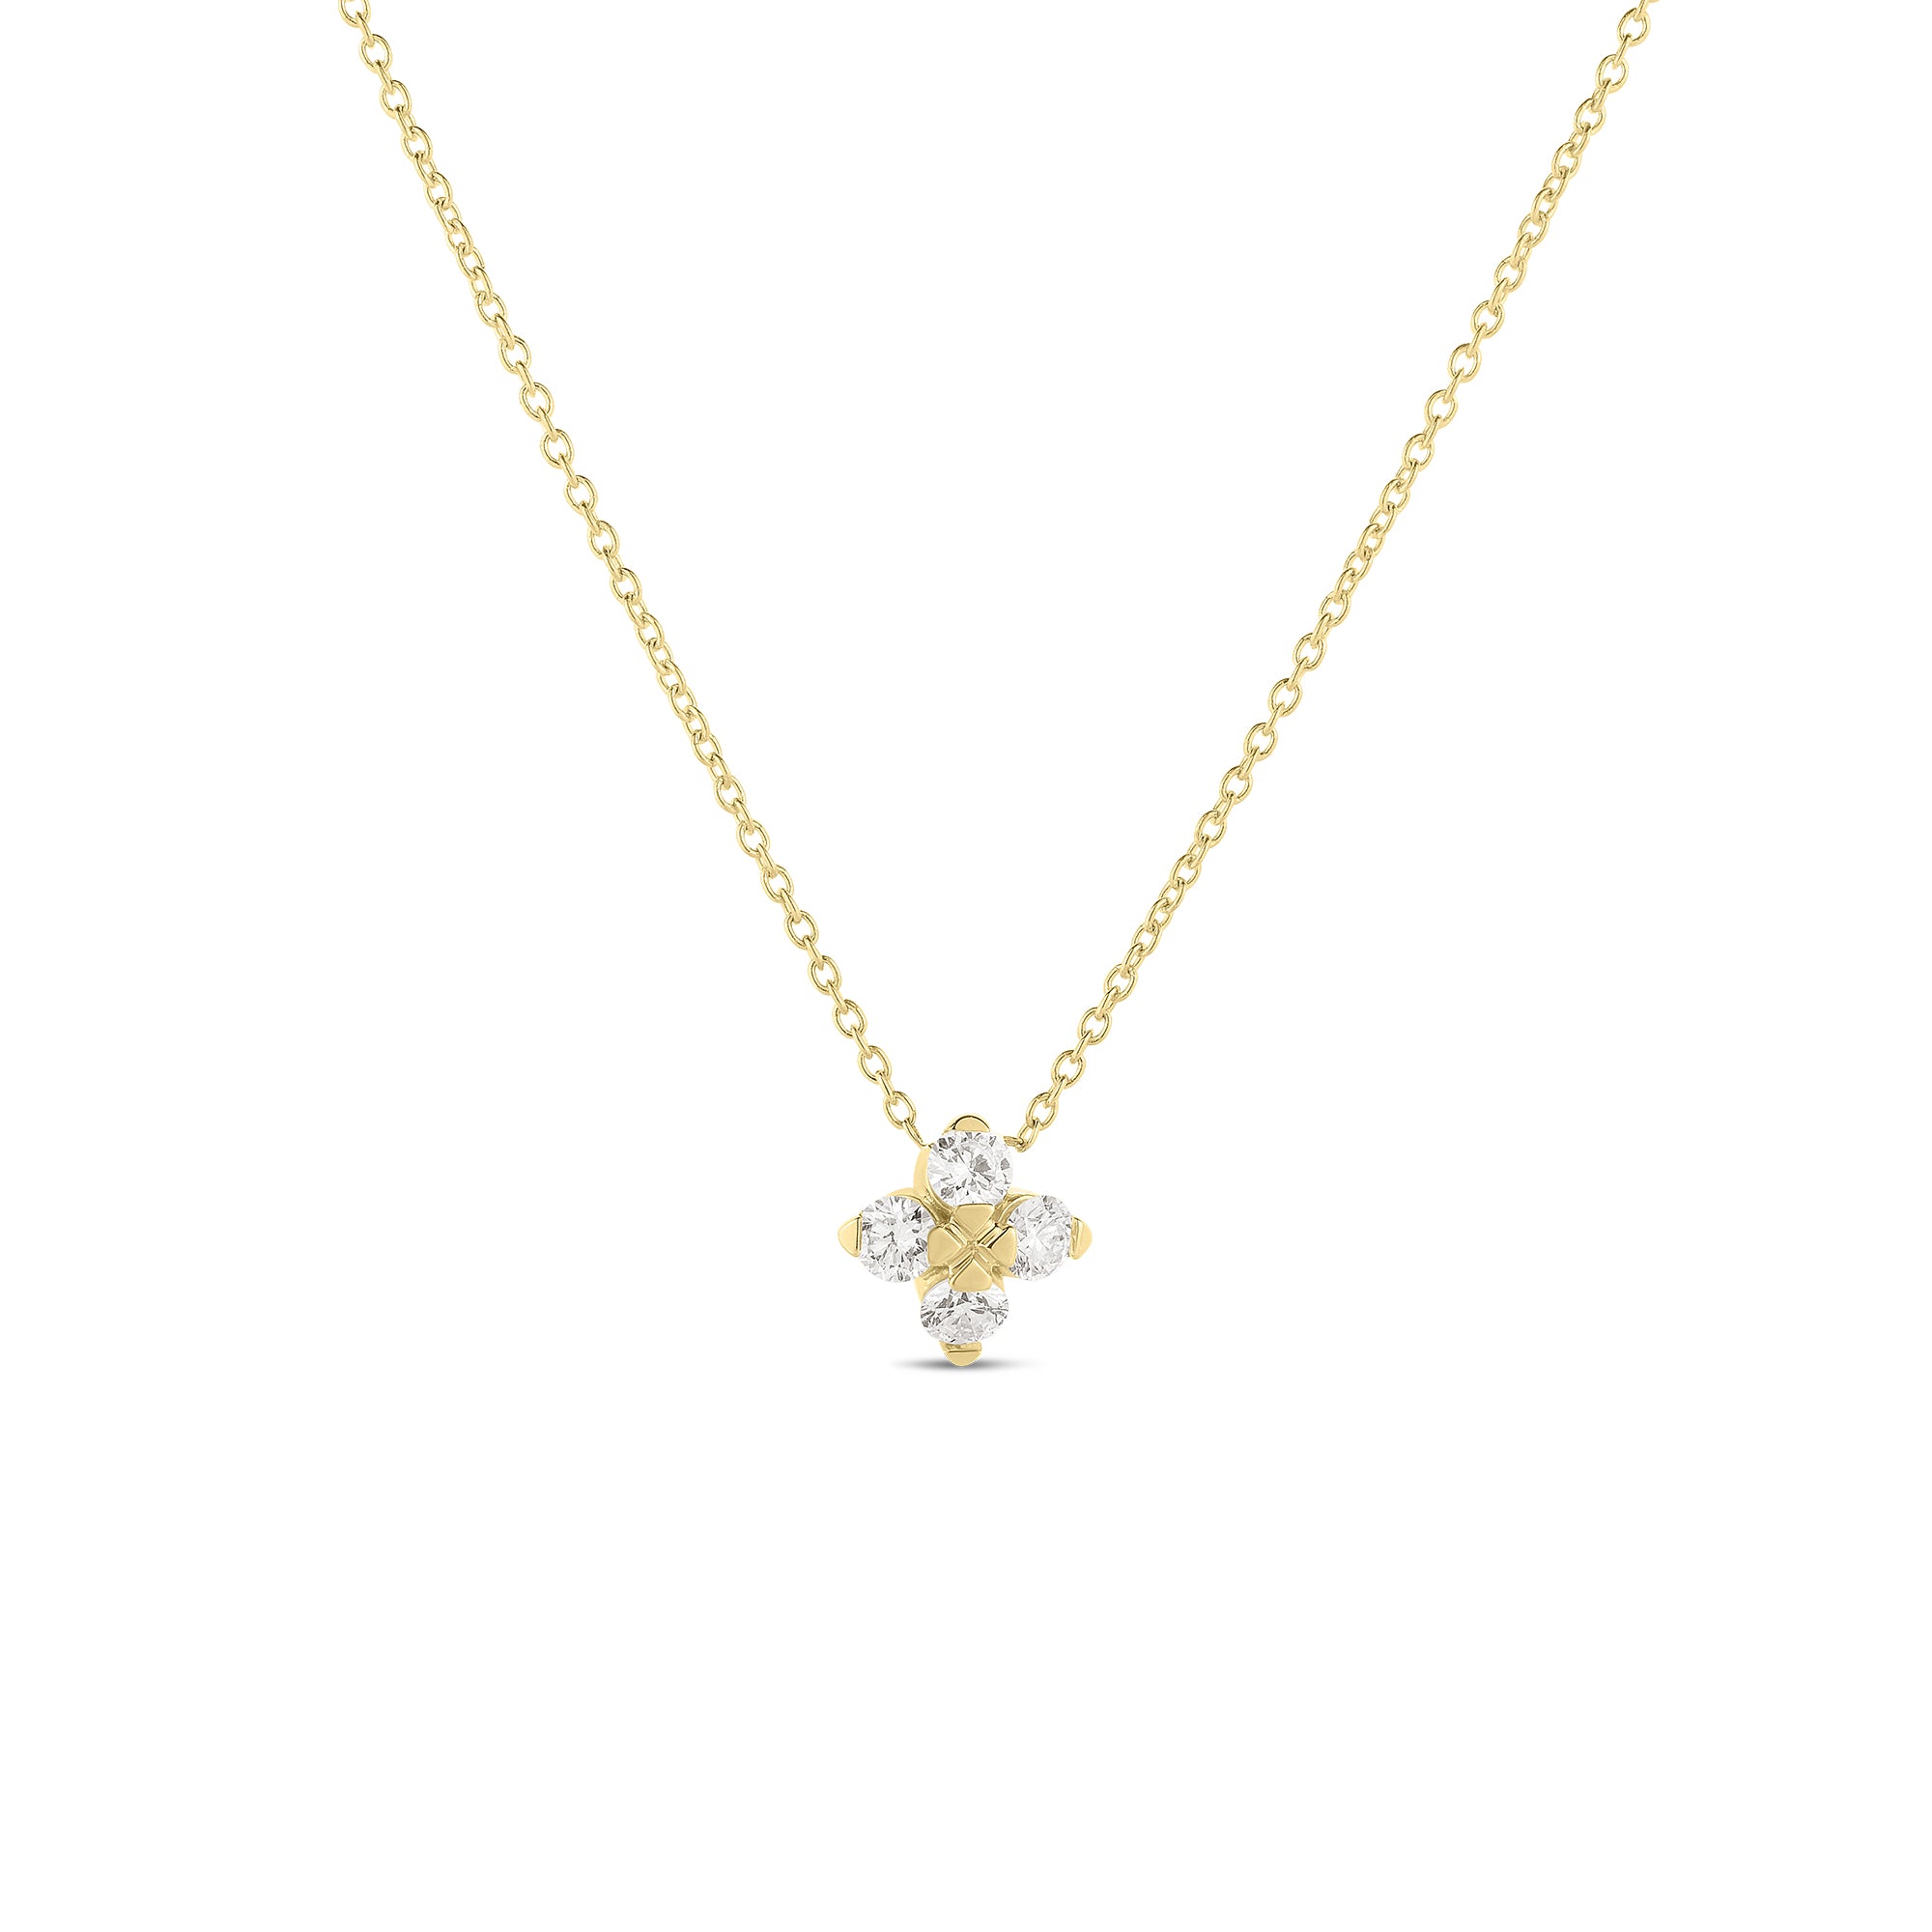 18K YELLOW GOLD LOVE IN VERONA SMALL FLOWER DIAMOND NECKLACE